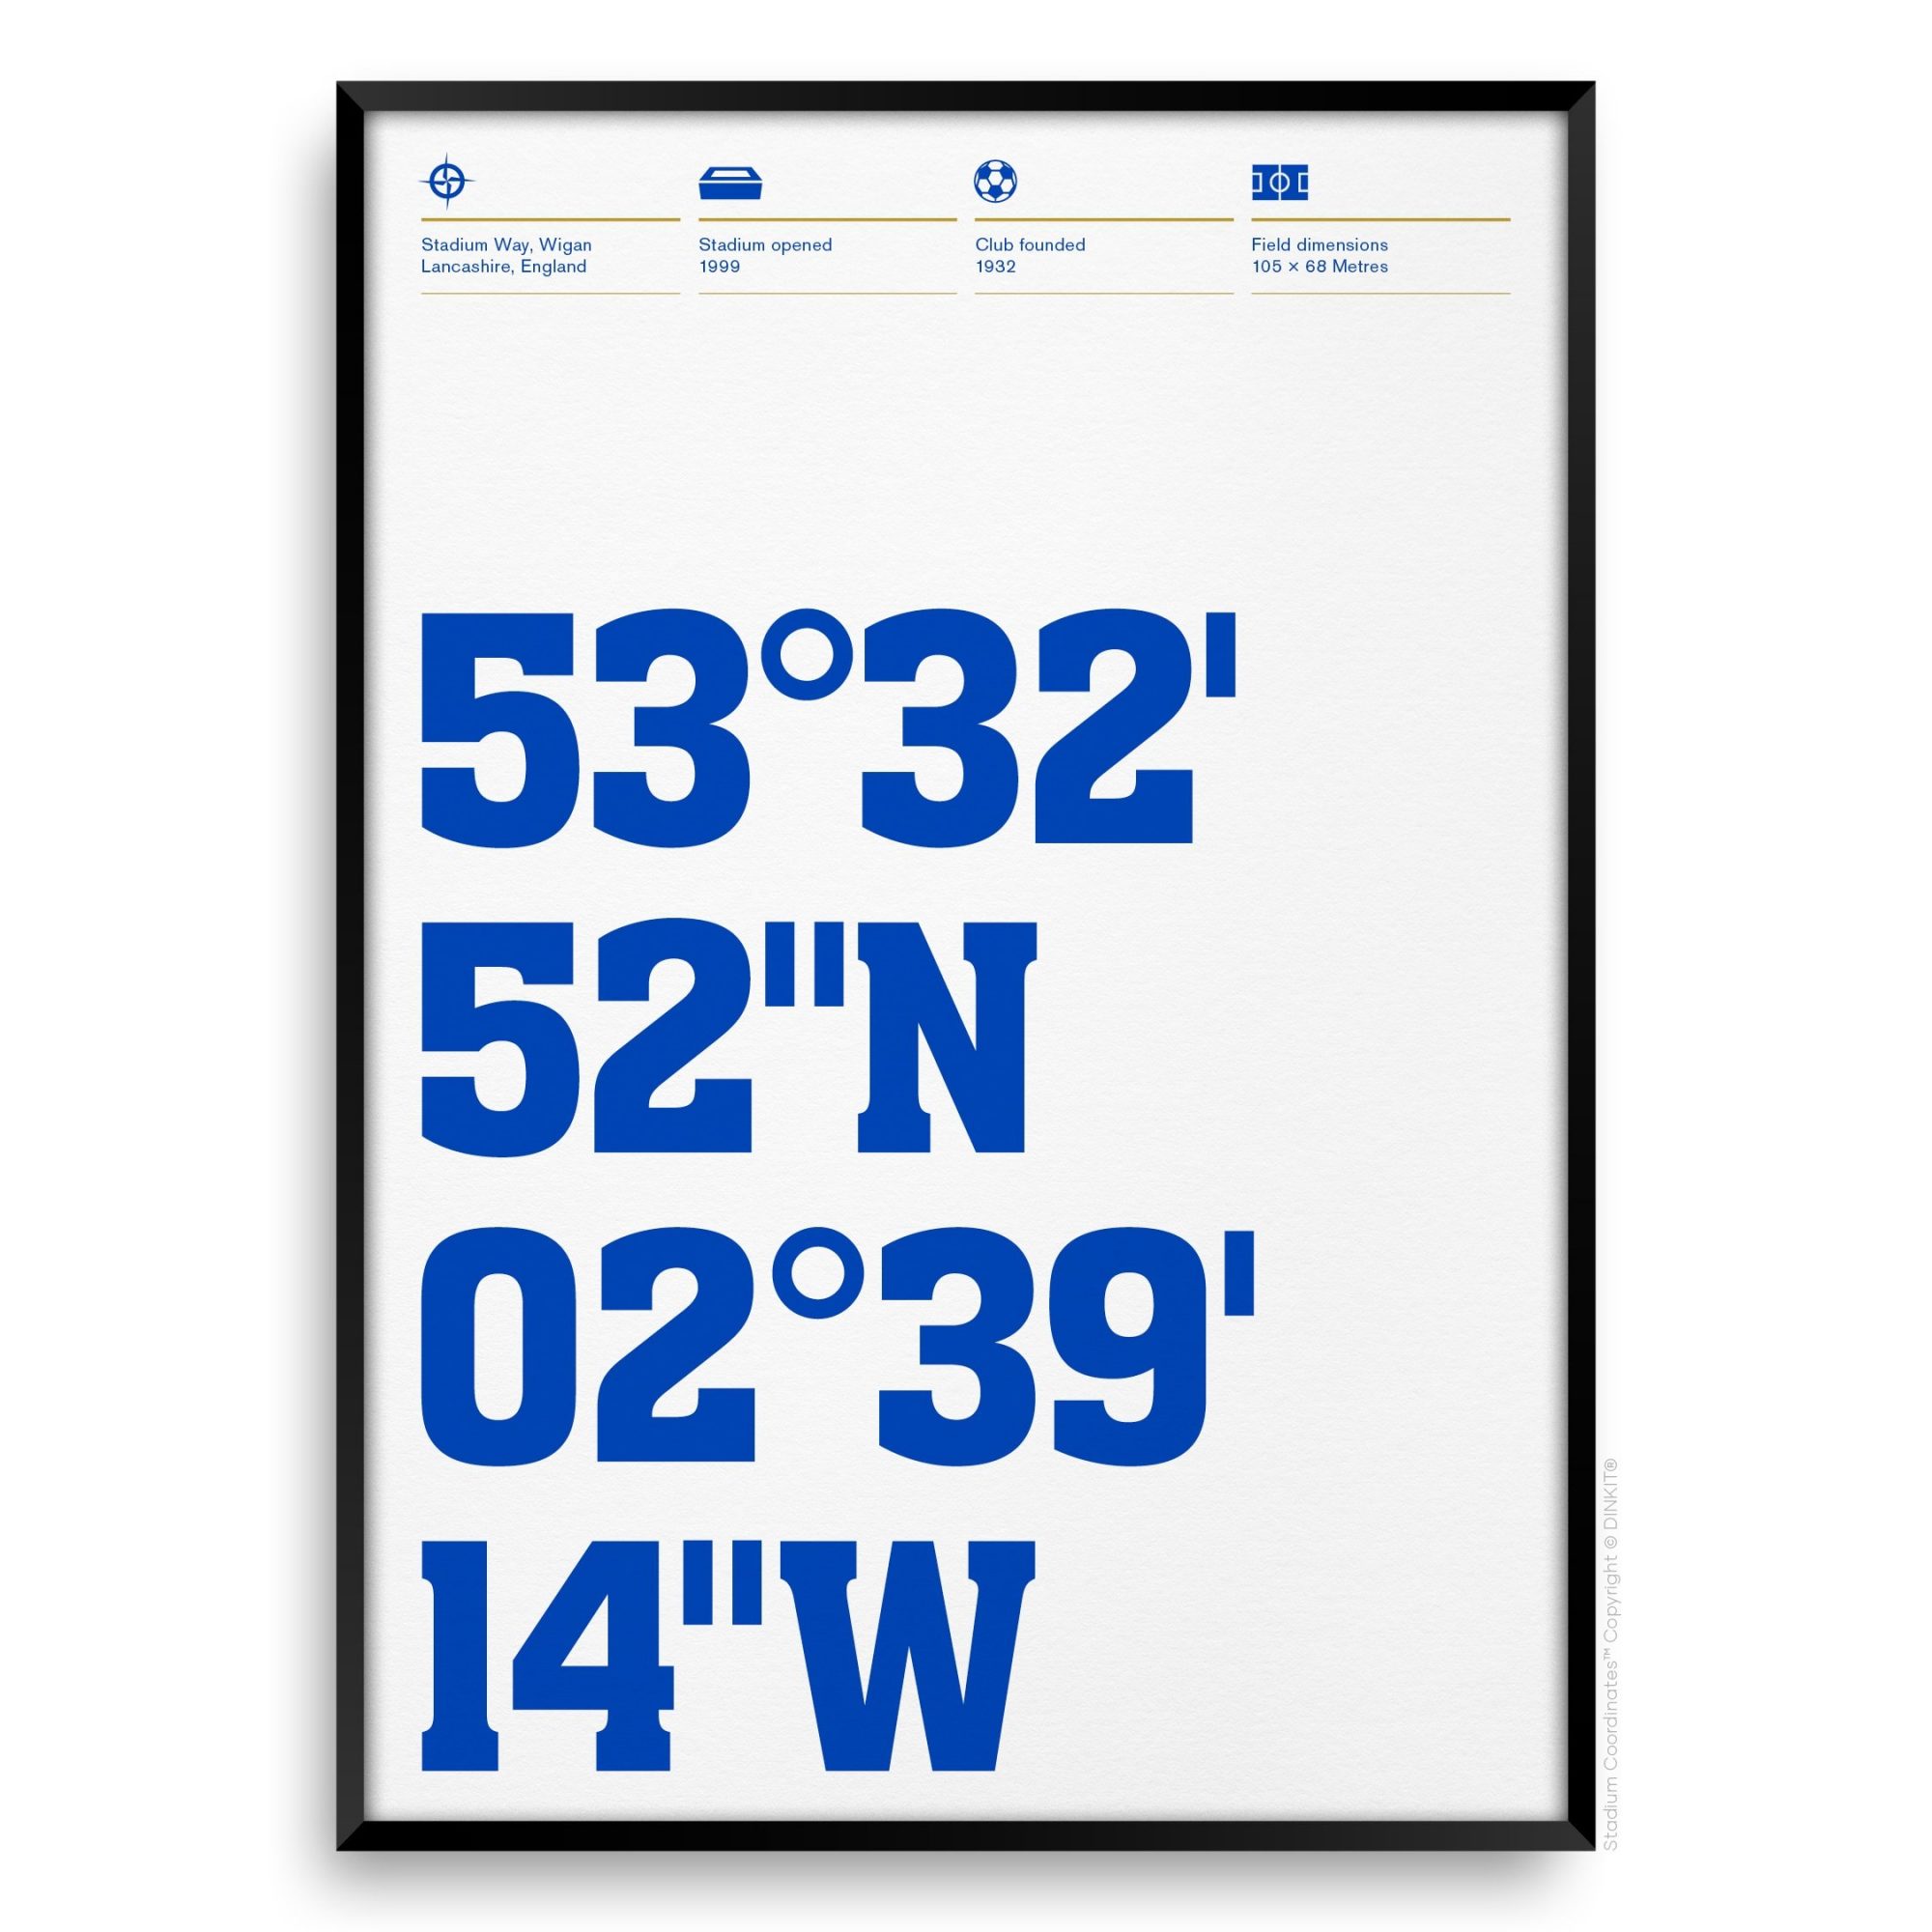 Wigan Athletic Gifts, Football Posters, Gift Ideas